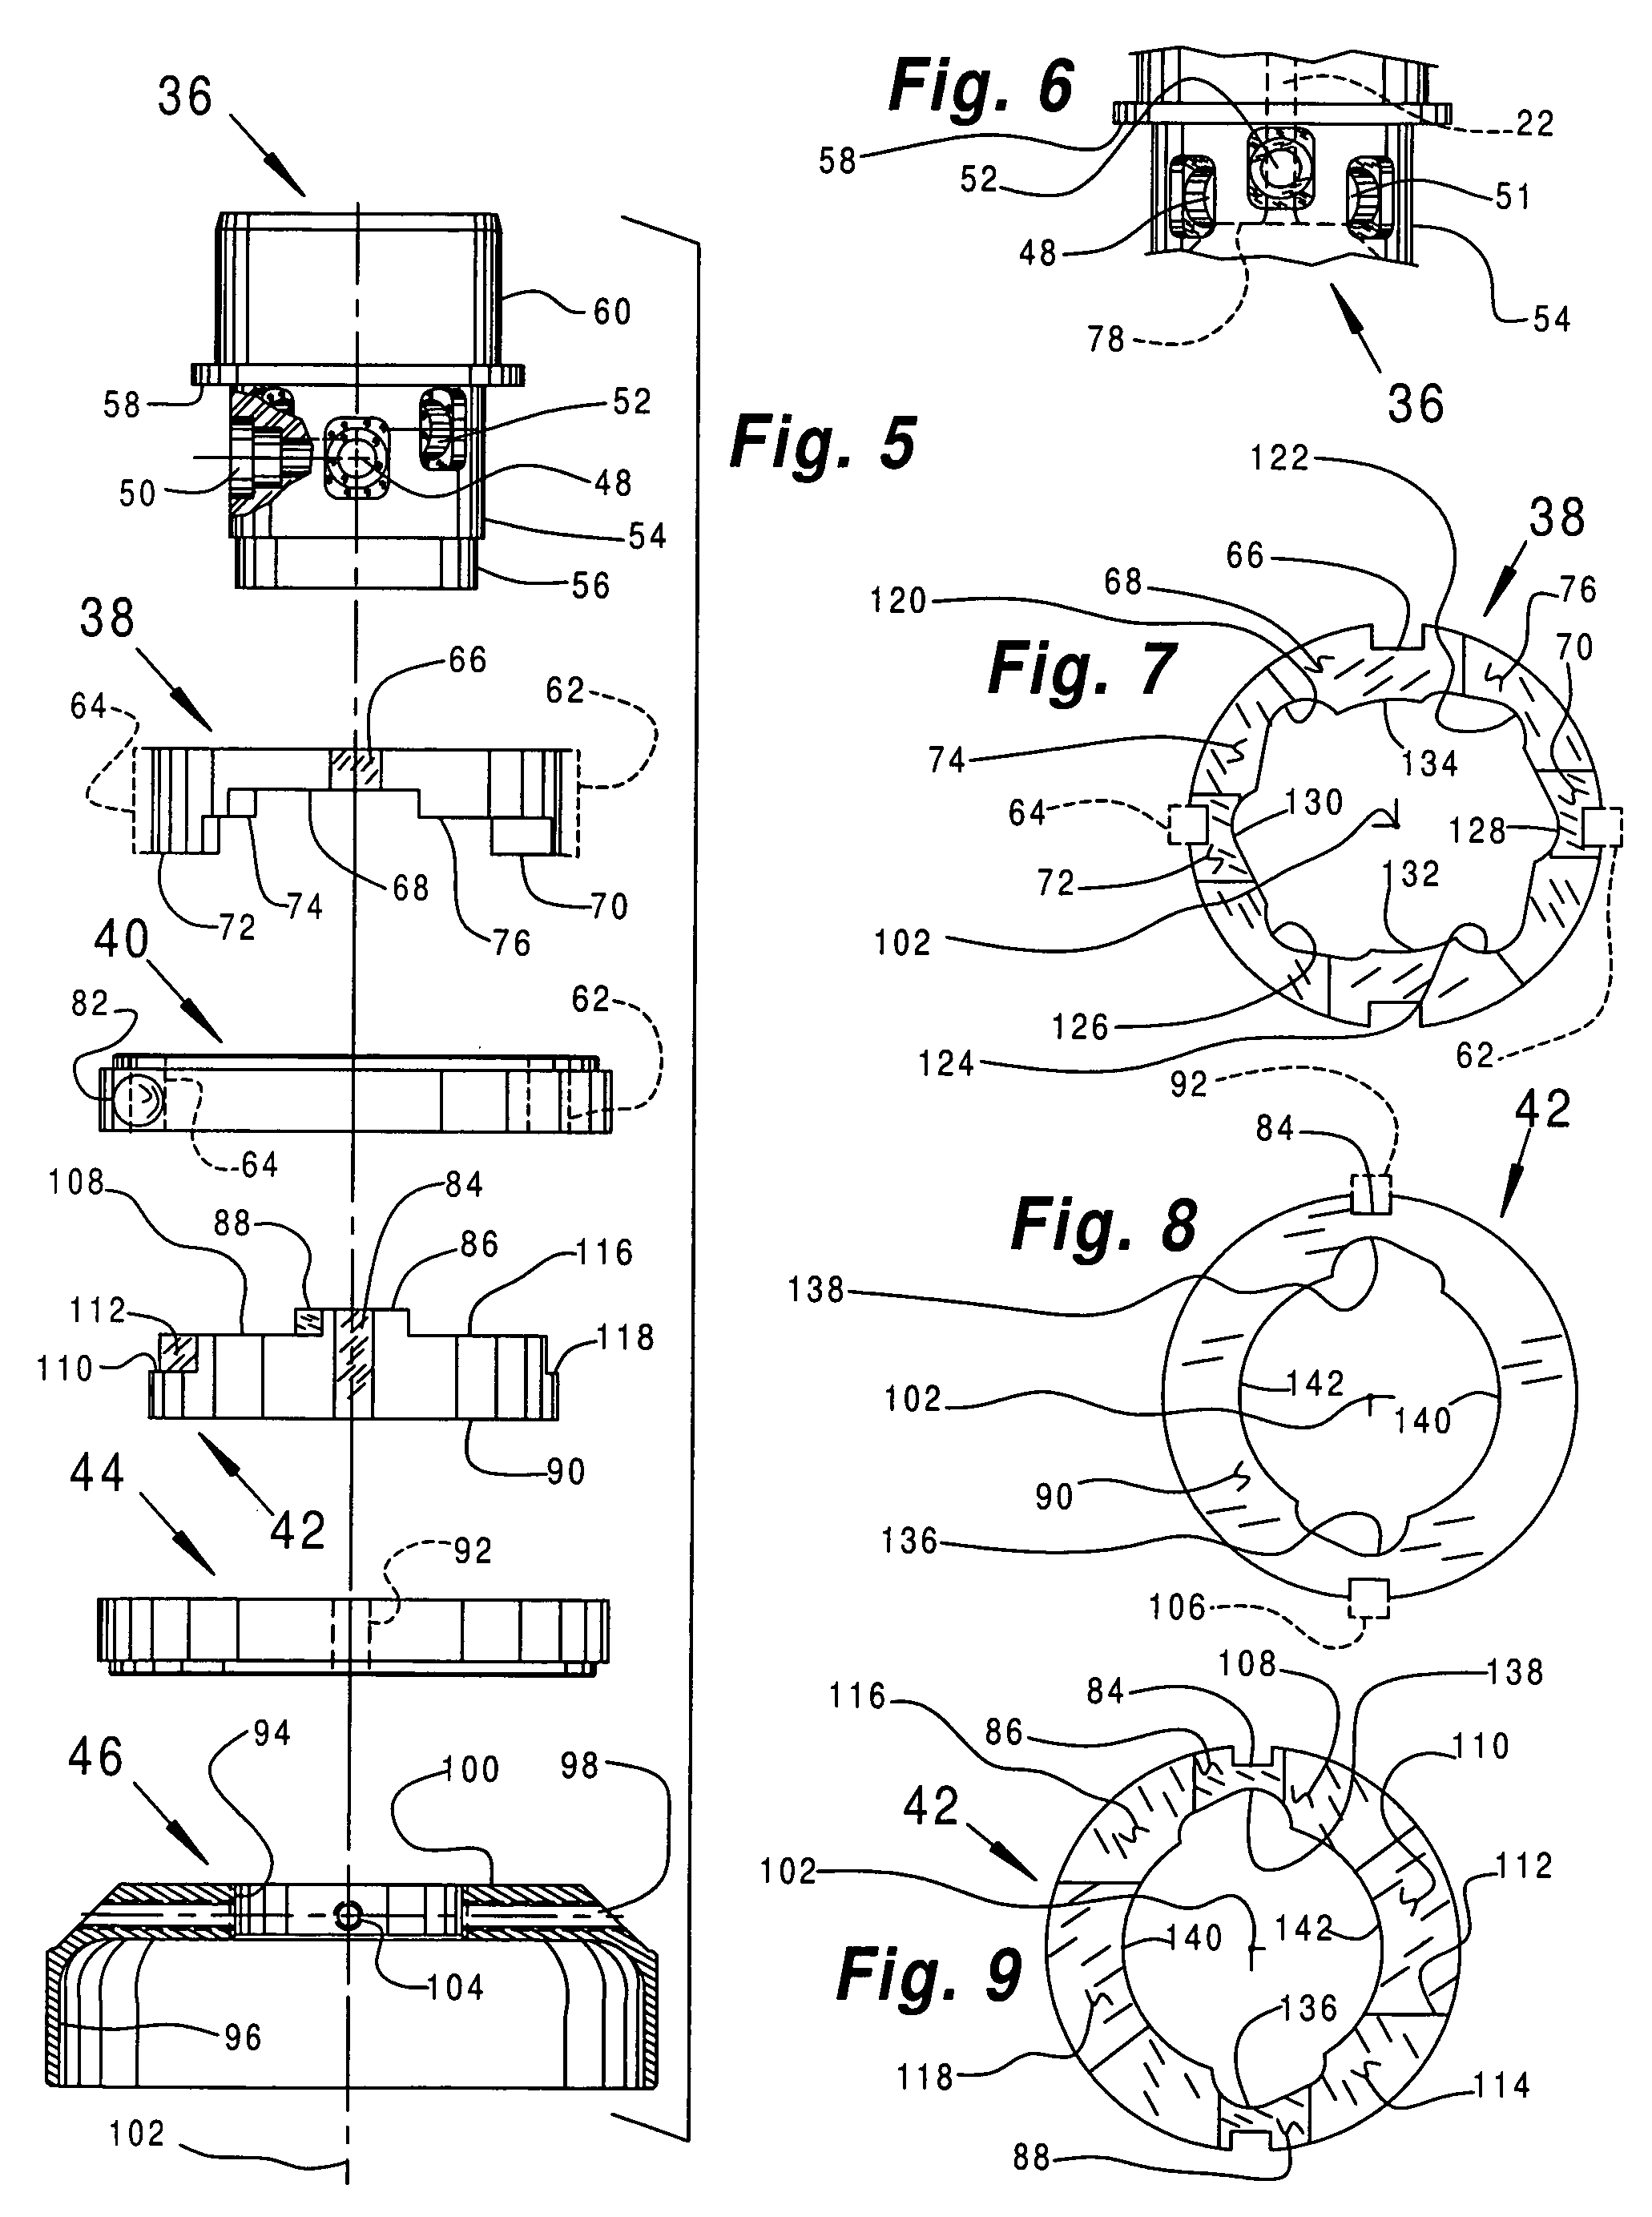 Crimping tool with quick-change crimp head for sealing and electrically crimping electrical contacts to insulated wire